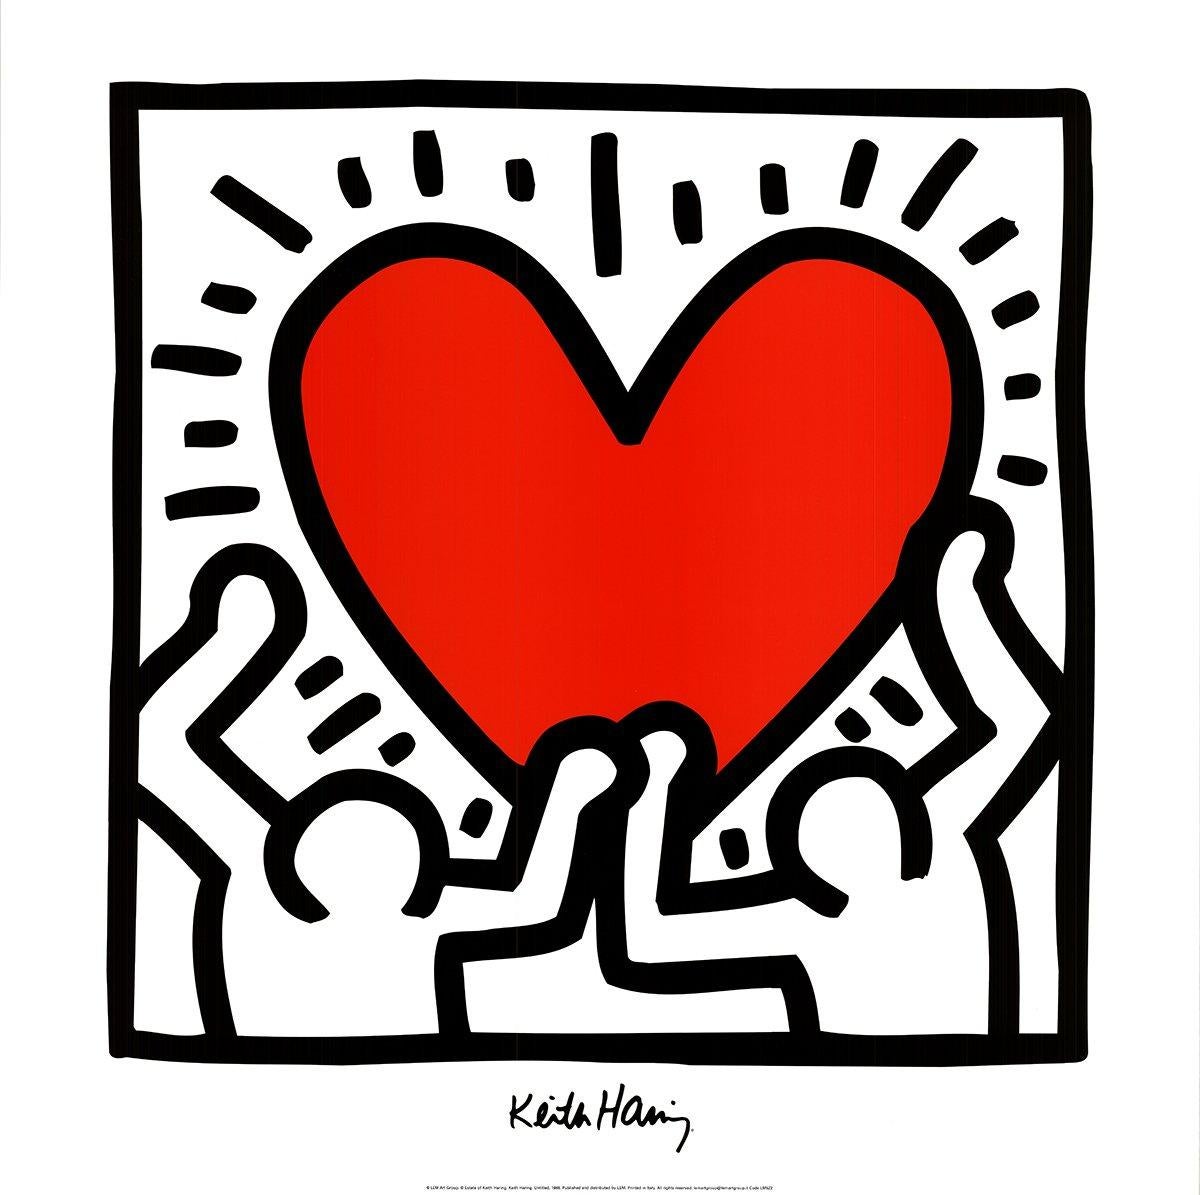 Paper Size: 27.5 x 27.5 inches ( 69.85 x 69.85 cm )
 Image Size: 24.25 x 24.25 inches ( 61.595 x 61.595 cm )
 Framed: No
 Condition: A: Mint
 
 Additional Details: Reproduction of Keith Haring's most popular works.
 
 Shipping and Handling: We ship